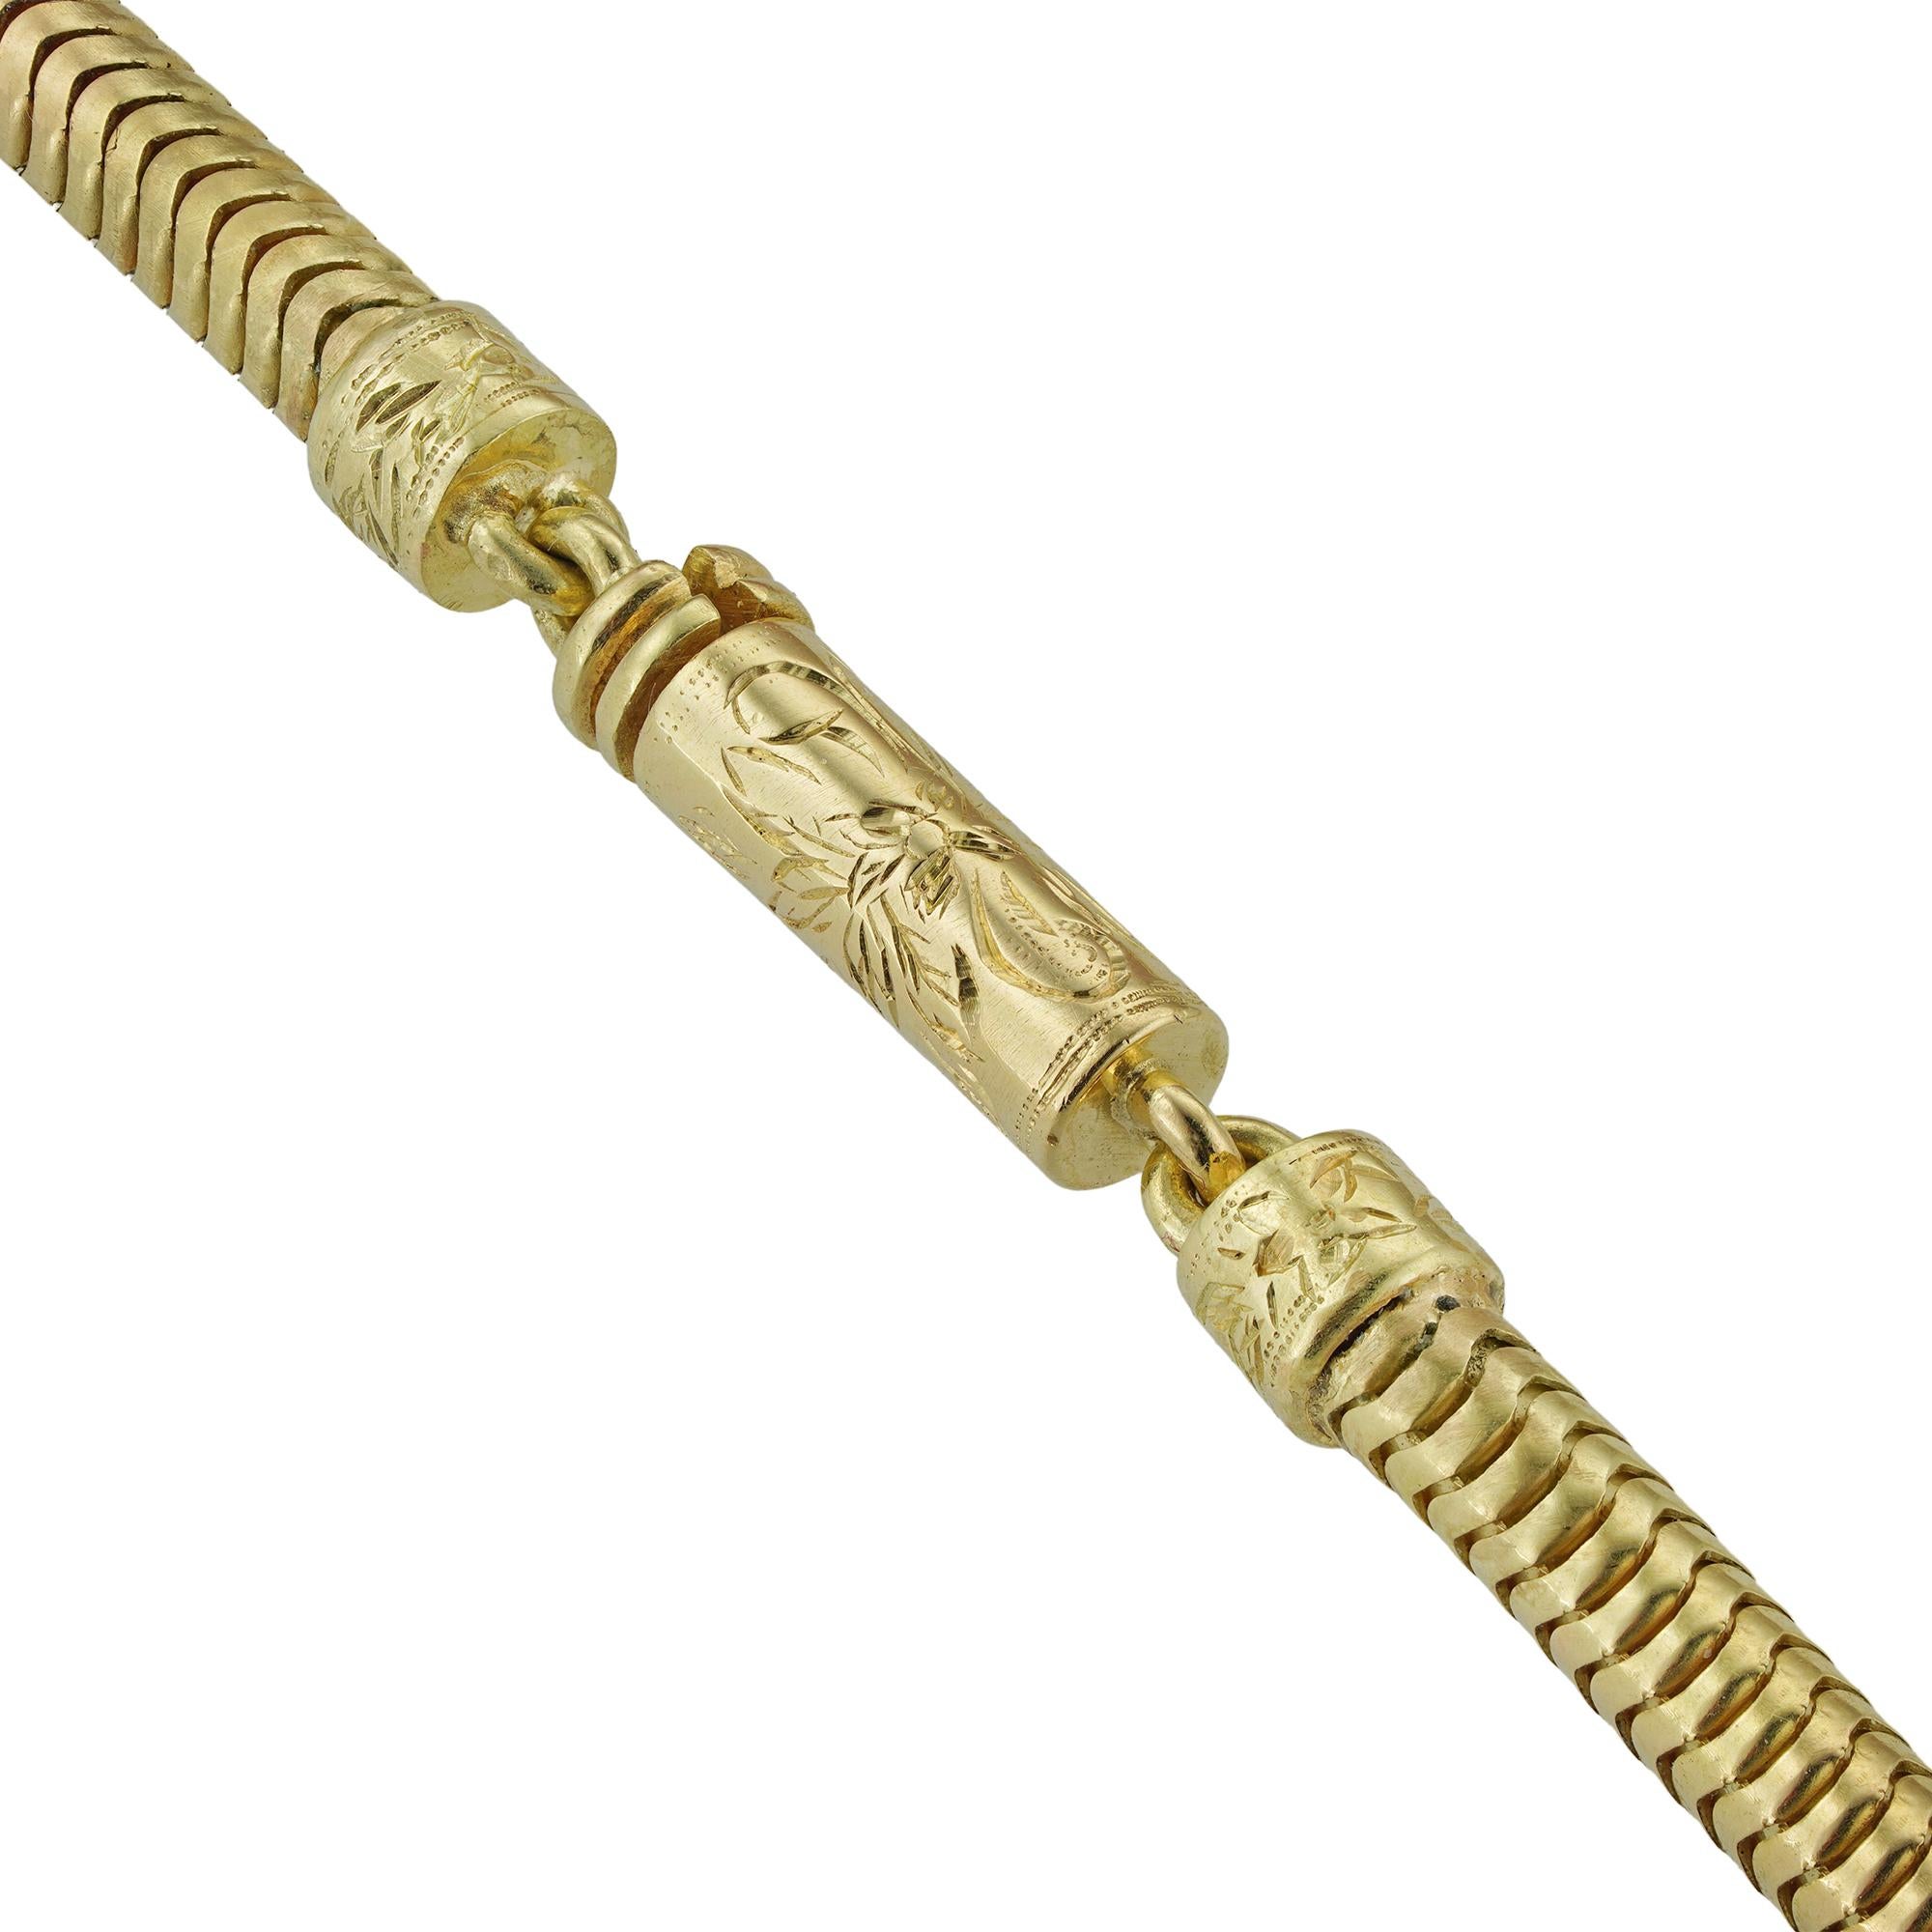 A gold Brazilian snake chain with an engraved barrel clasp, measuring approximately 110 cm (43.5 inches) in length, hallmarked 18 carat gold, London 2004, bearing Bentley & Skinner sponsor mark, gross weight 61.2 grams. 

This chain is in perfect